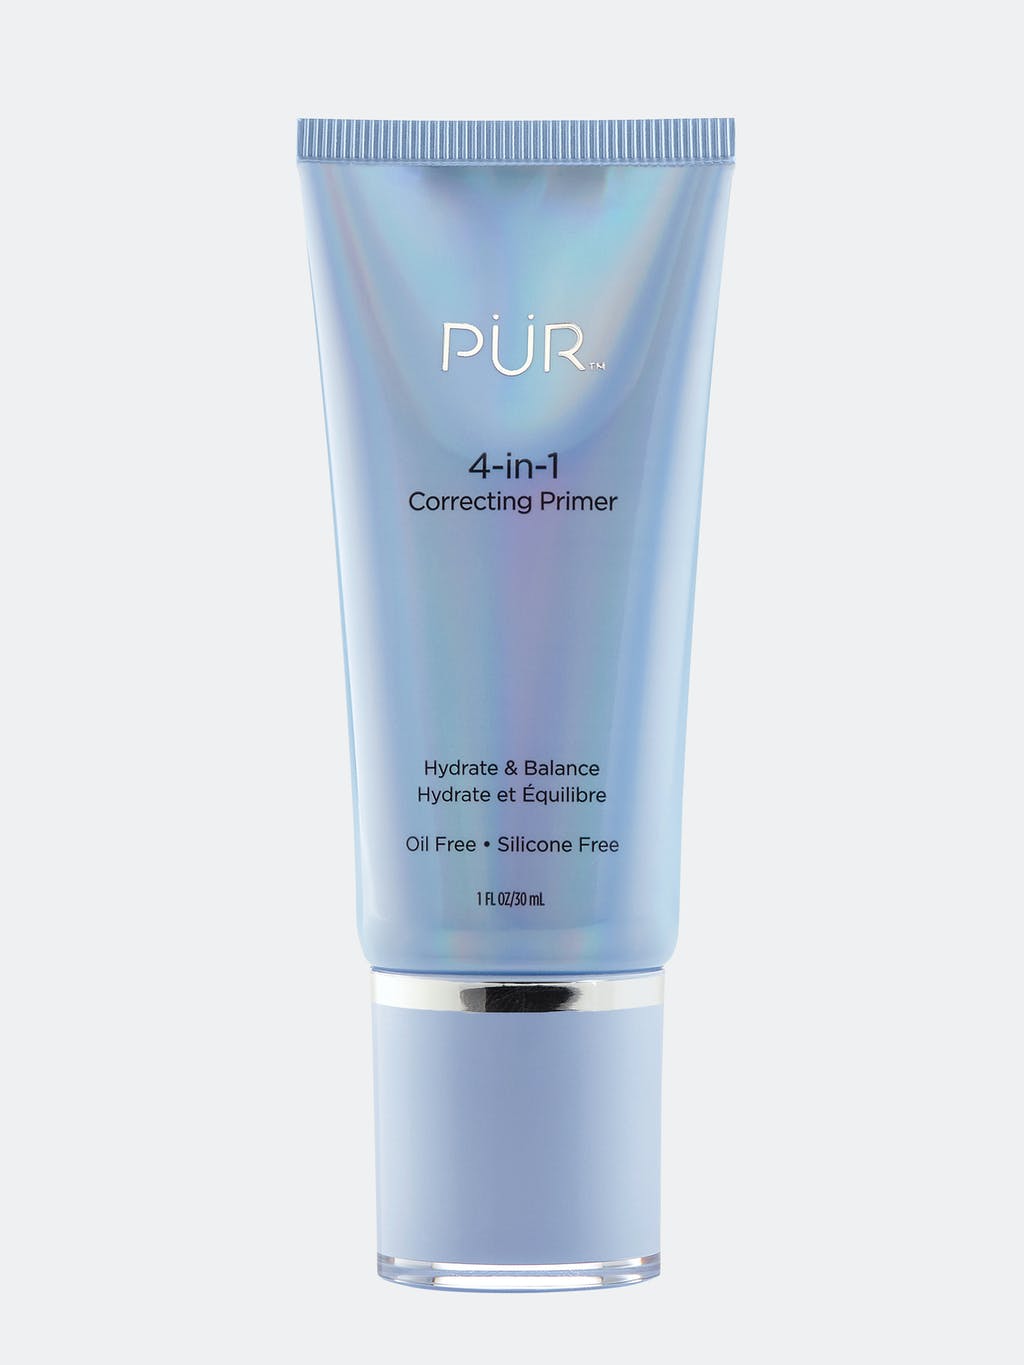 4-in-1 Correcting Primer, Hydrate & Balance